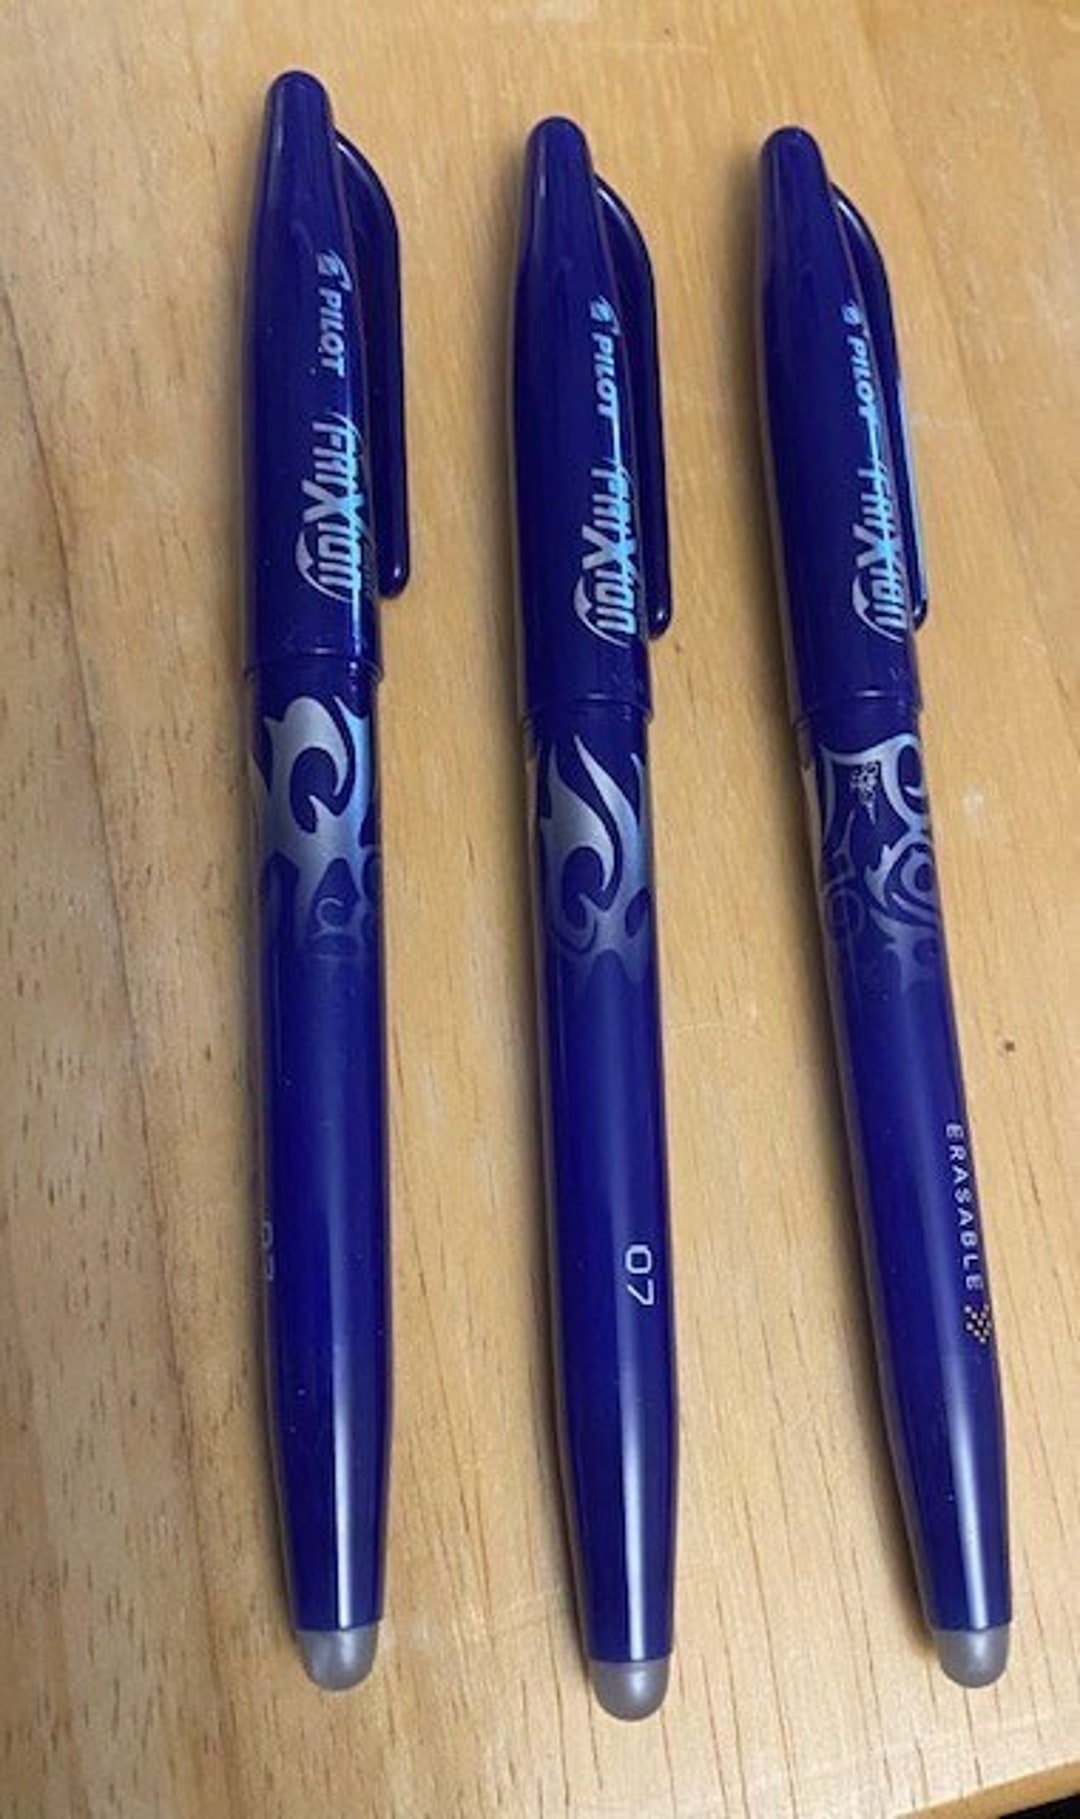 Frixion Pen, Hand Embroidery Transfer Pen, Erasable Pen, Pilot Frixion Pen, Frixion  Erasable Pen -  Denmark